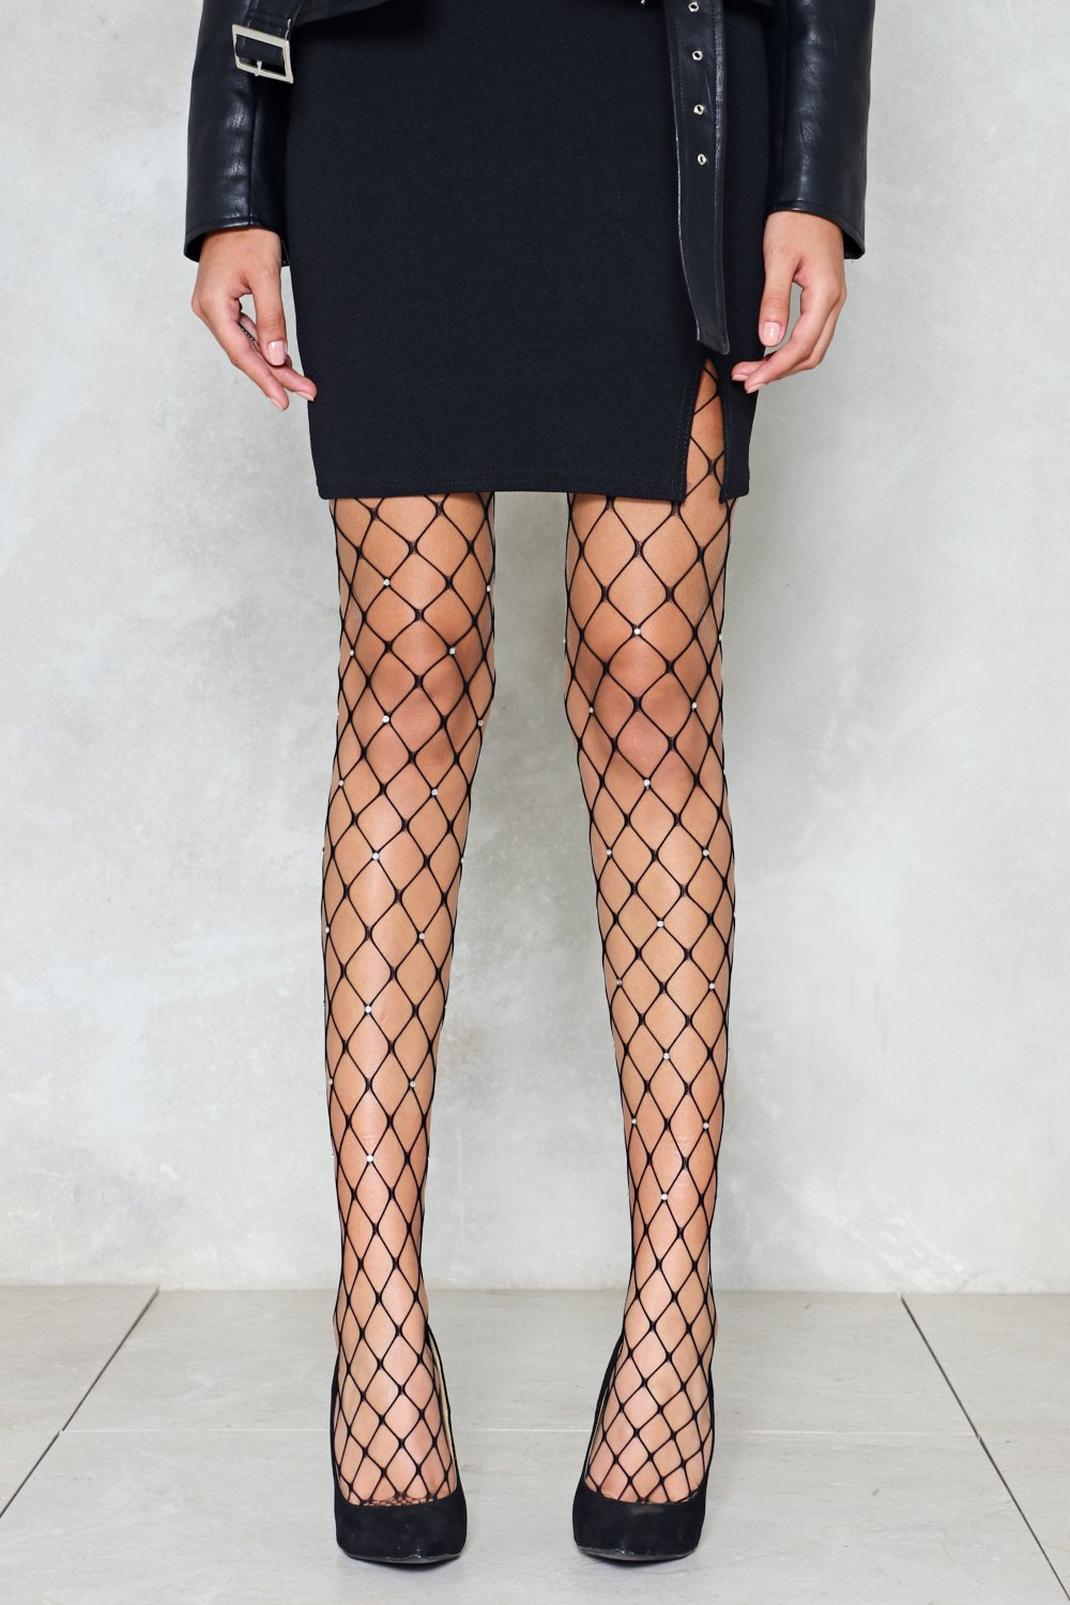 Candy Shop Diamante Fishnet Tights